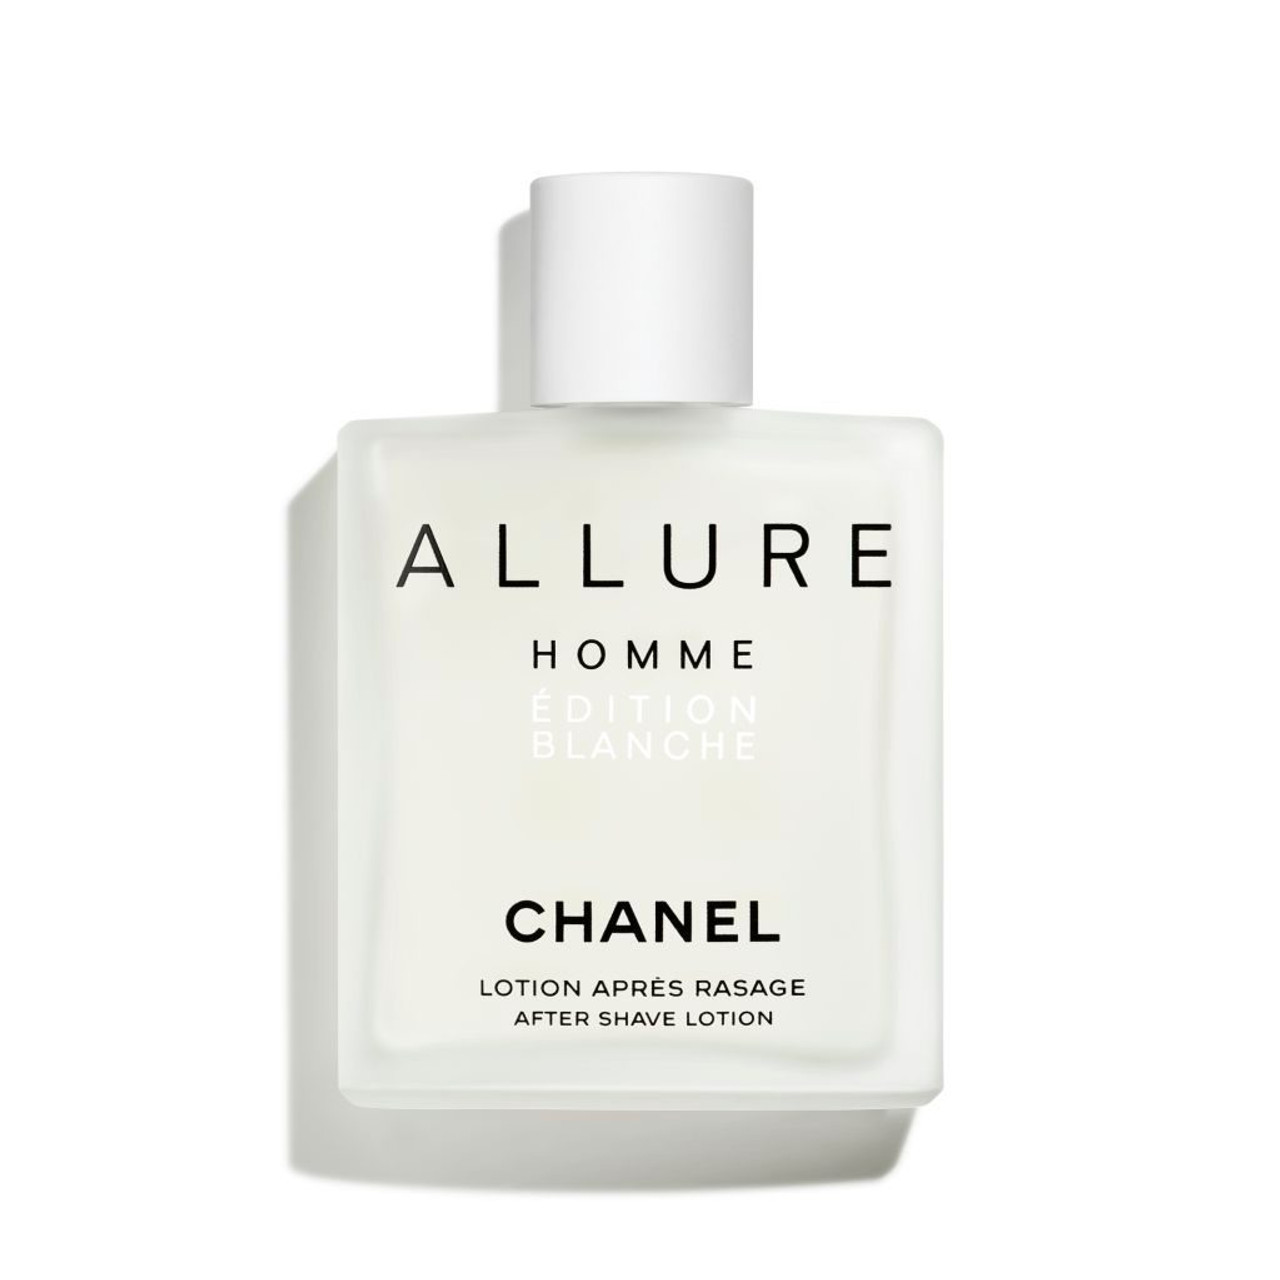 CHANEL ALLURE HOMME EDITION BLANCHE 3.4 AFTER SHAVE - Nandansons  International Inc.